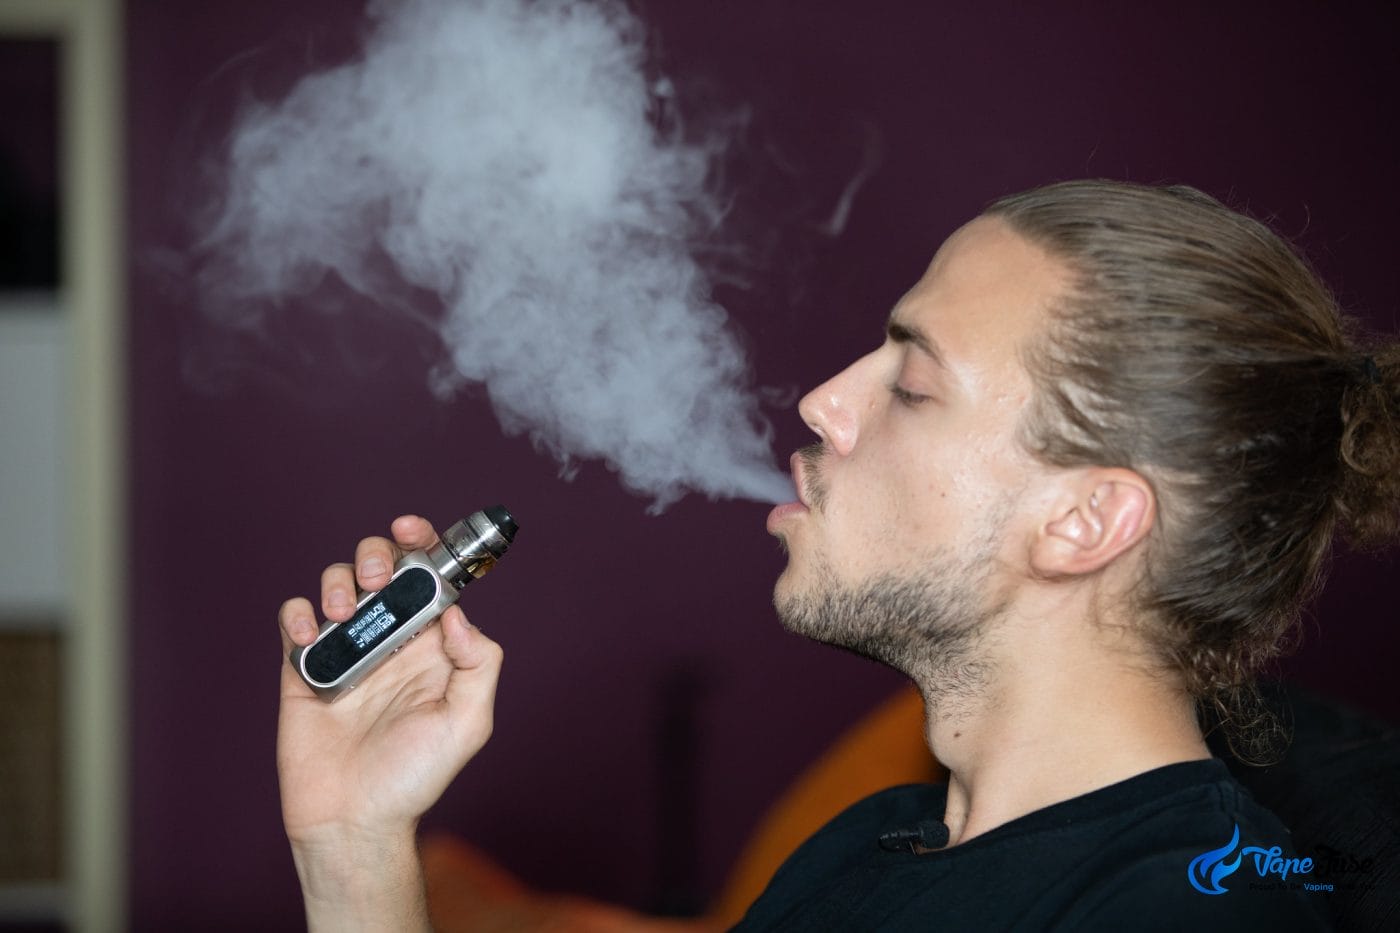 Vaping to reduce stress at home